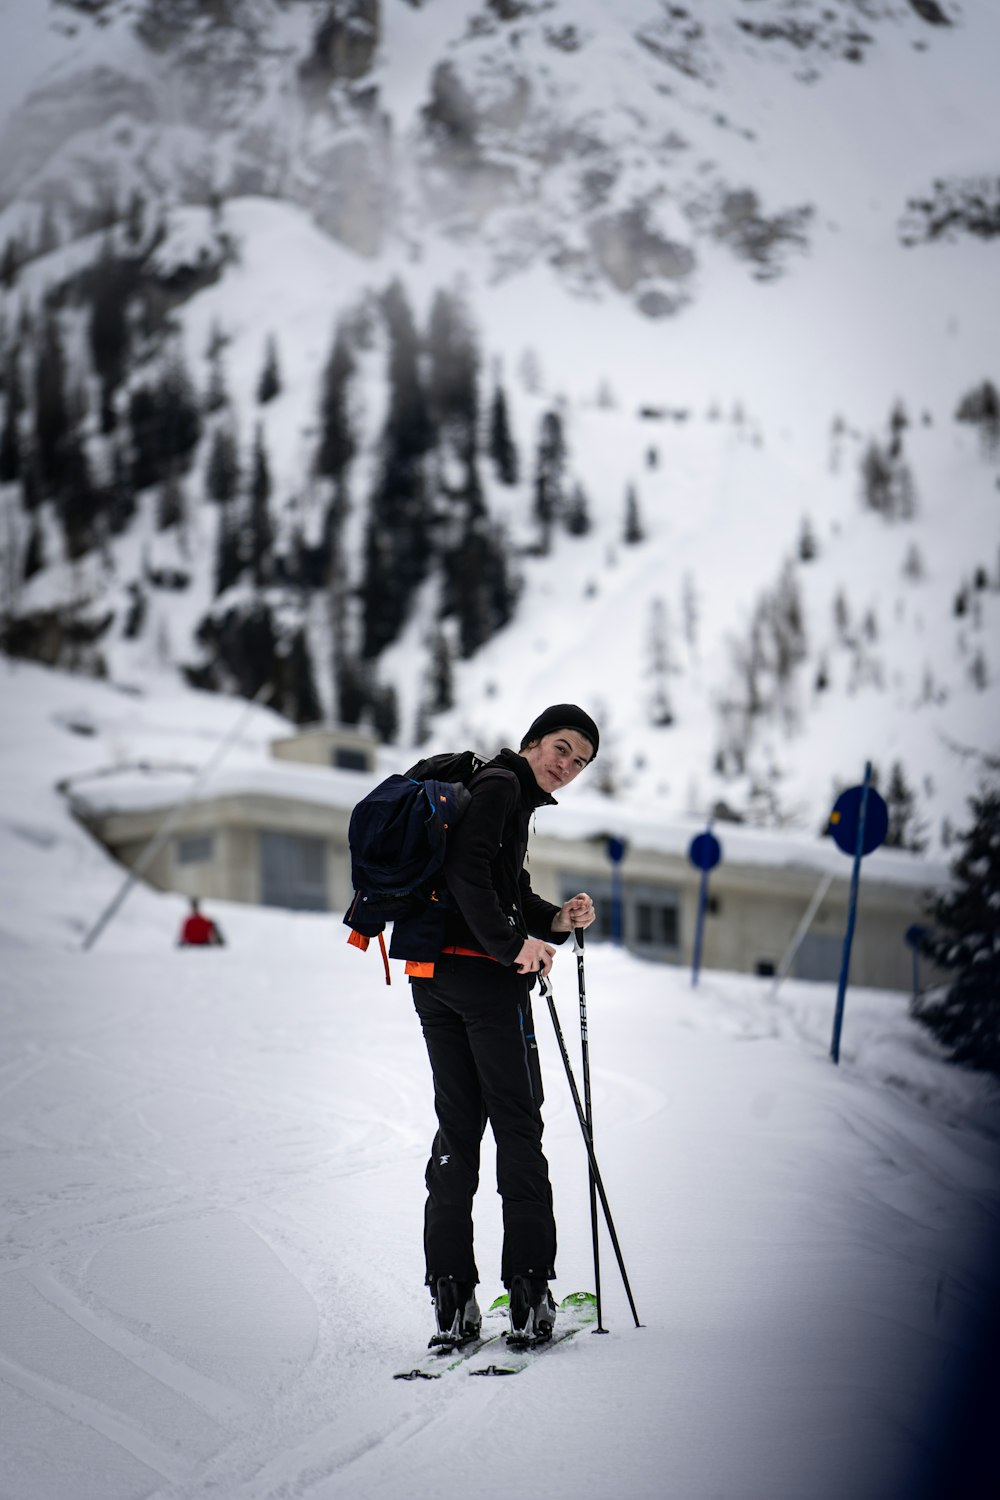 man in black jacket and black pants holding ski poles on snow covered ground during daytime